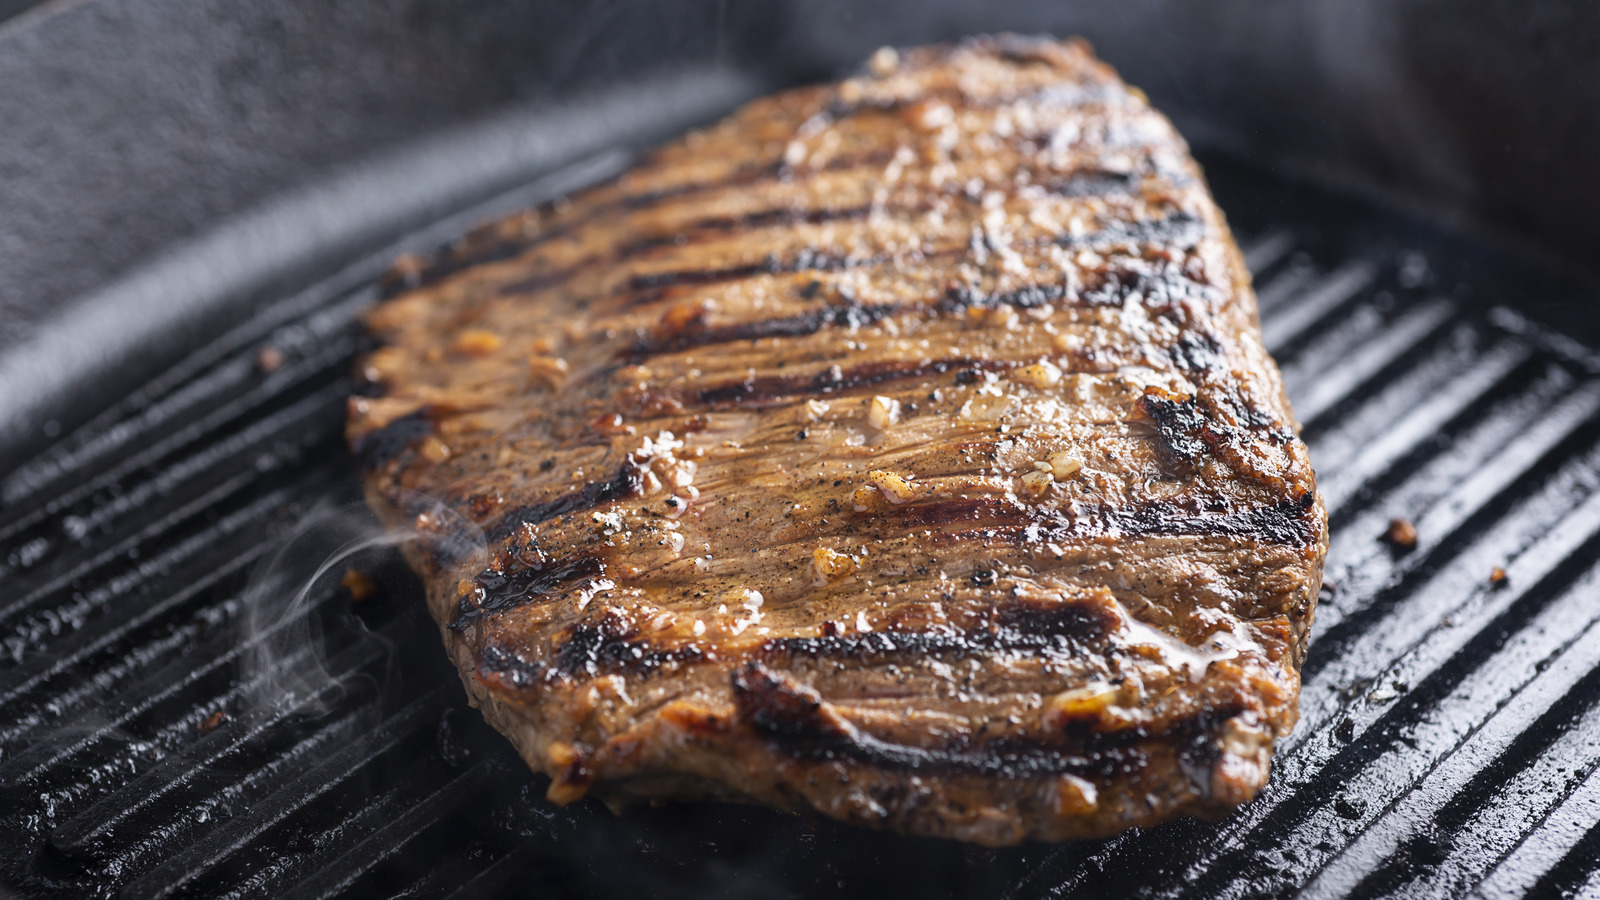 How Well Do Grill Pans Compare To The Real Thing?